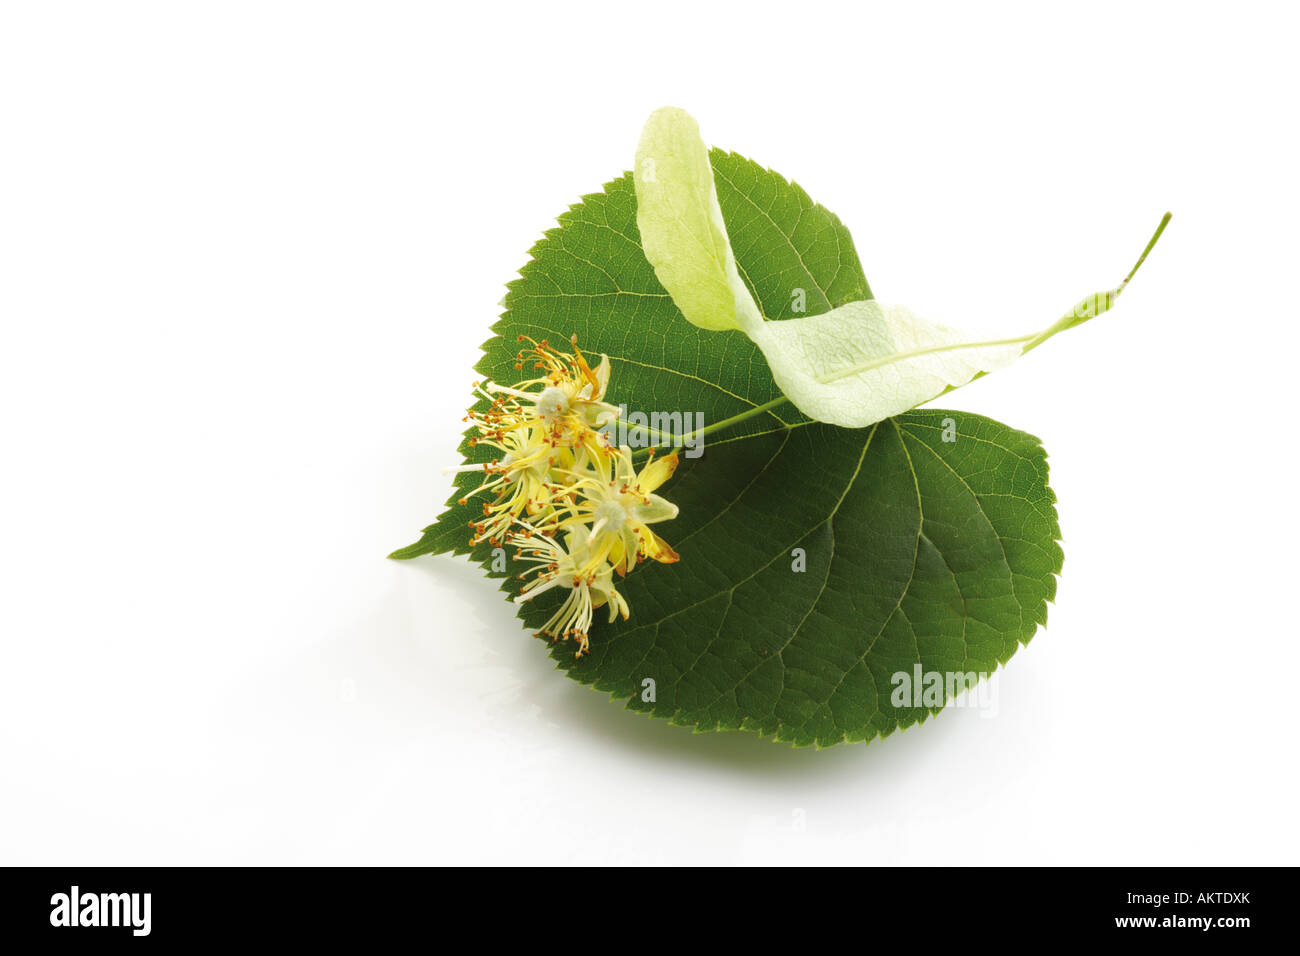 Lime blossoms and leaves, close-up Stock Photo